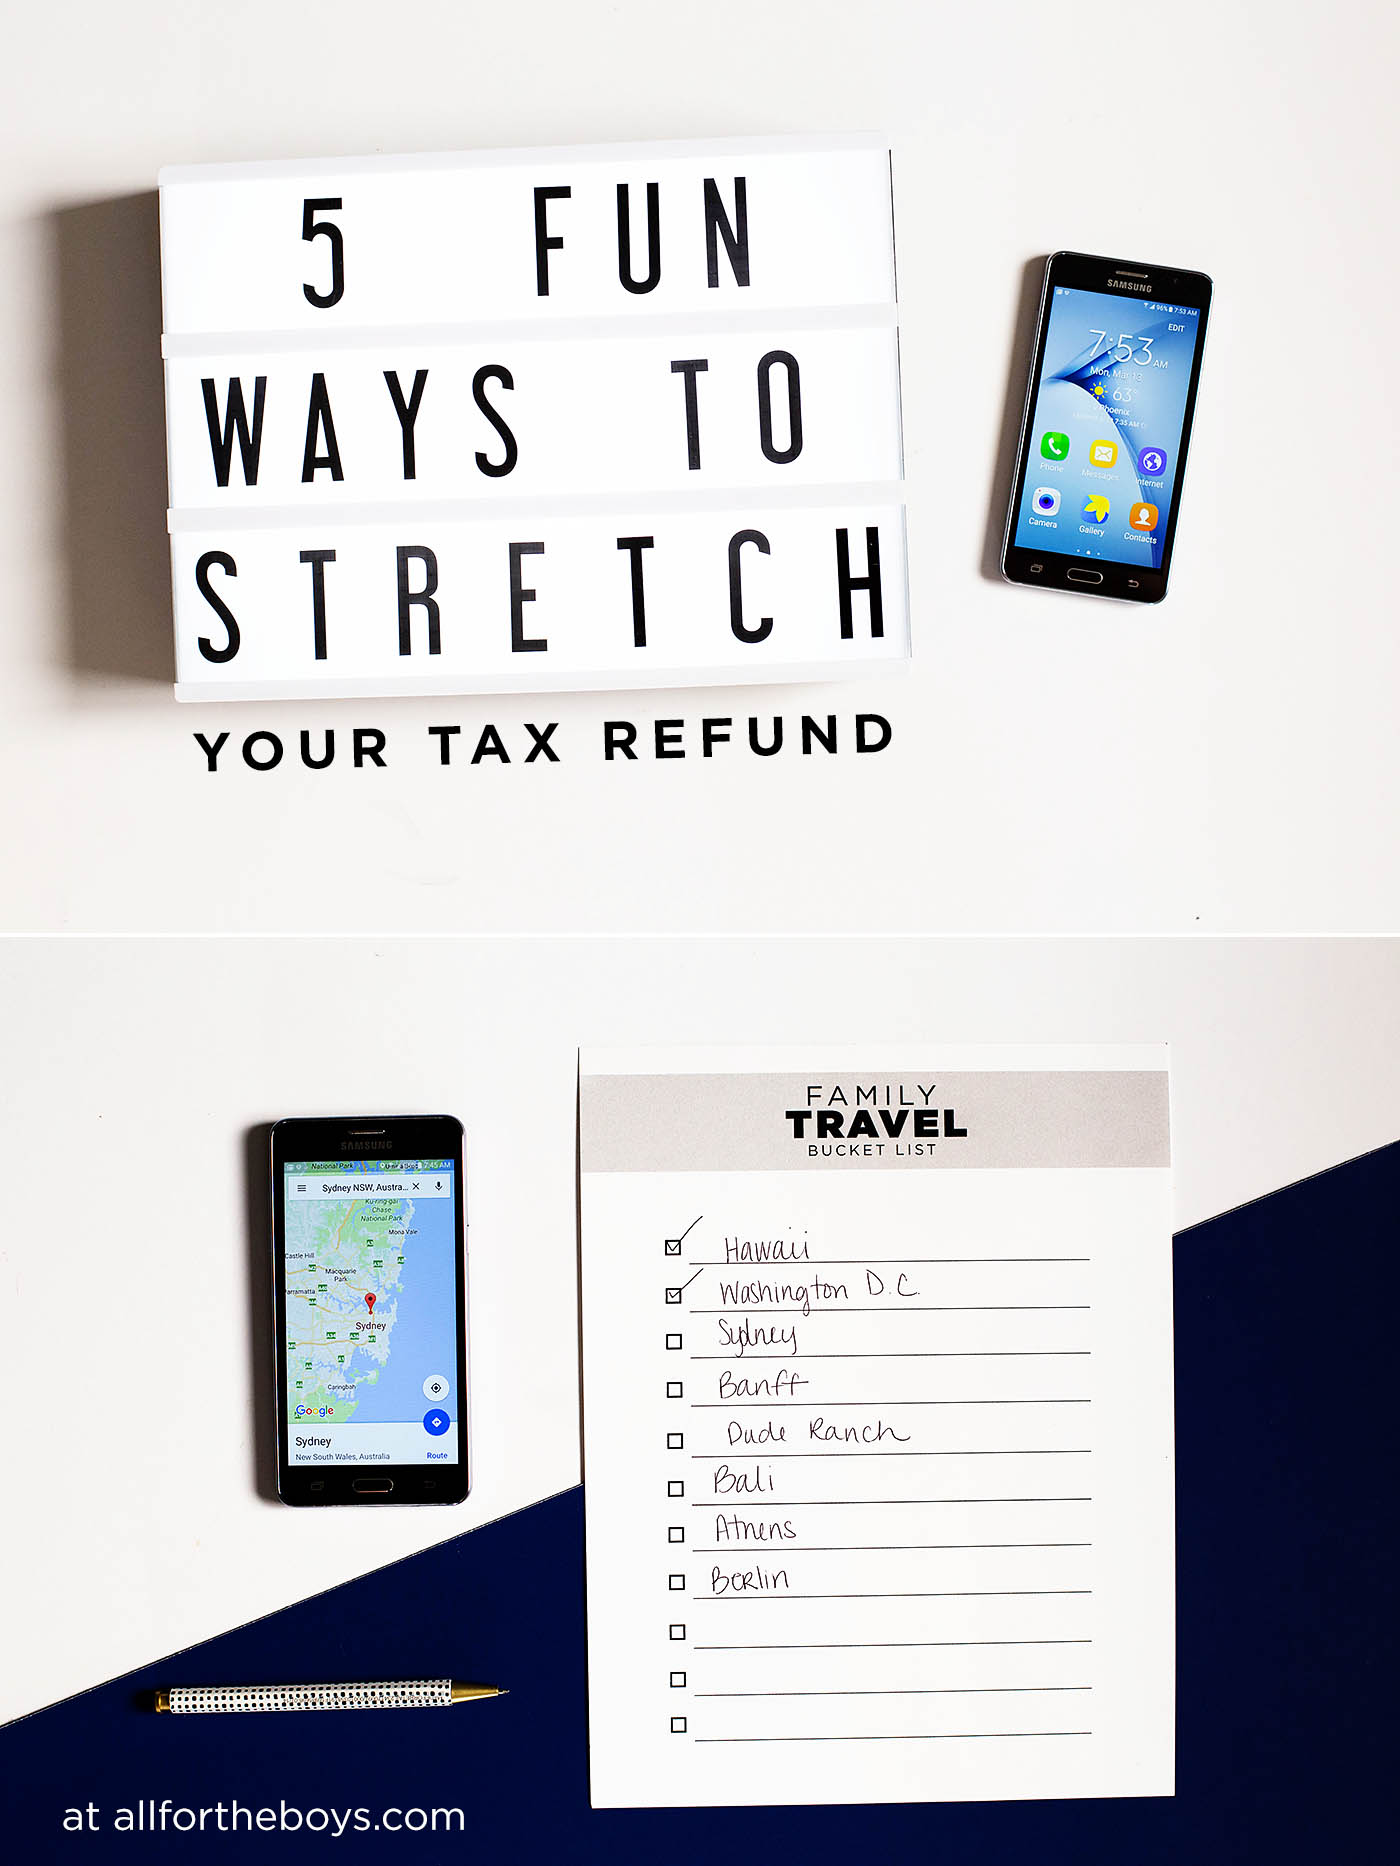 5 FUN ways to stretch your tax refund, plus a family travel bucket list printable!